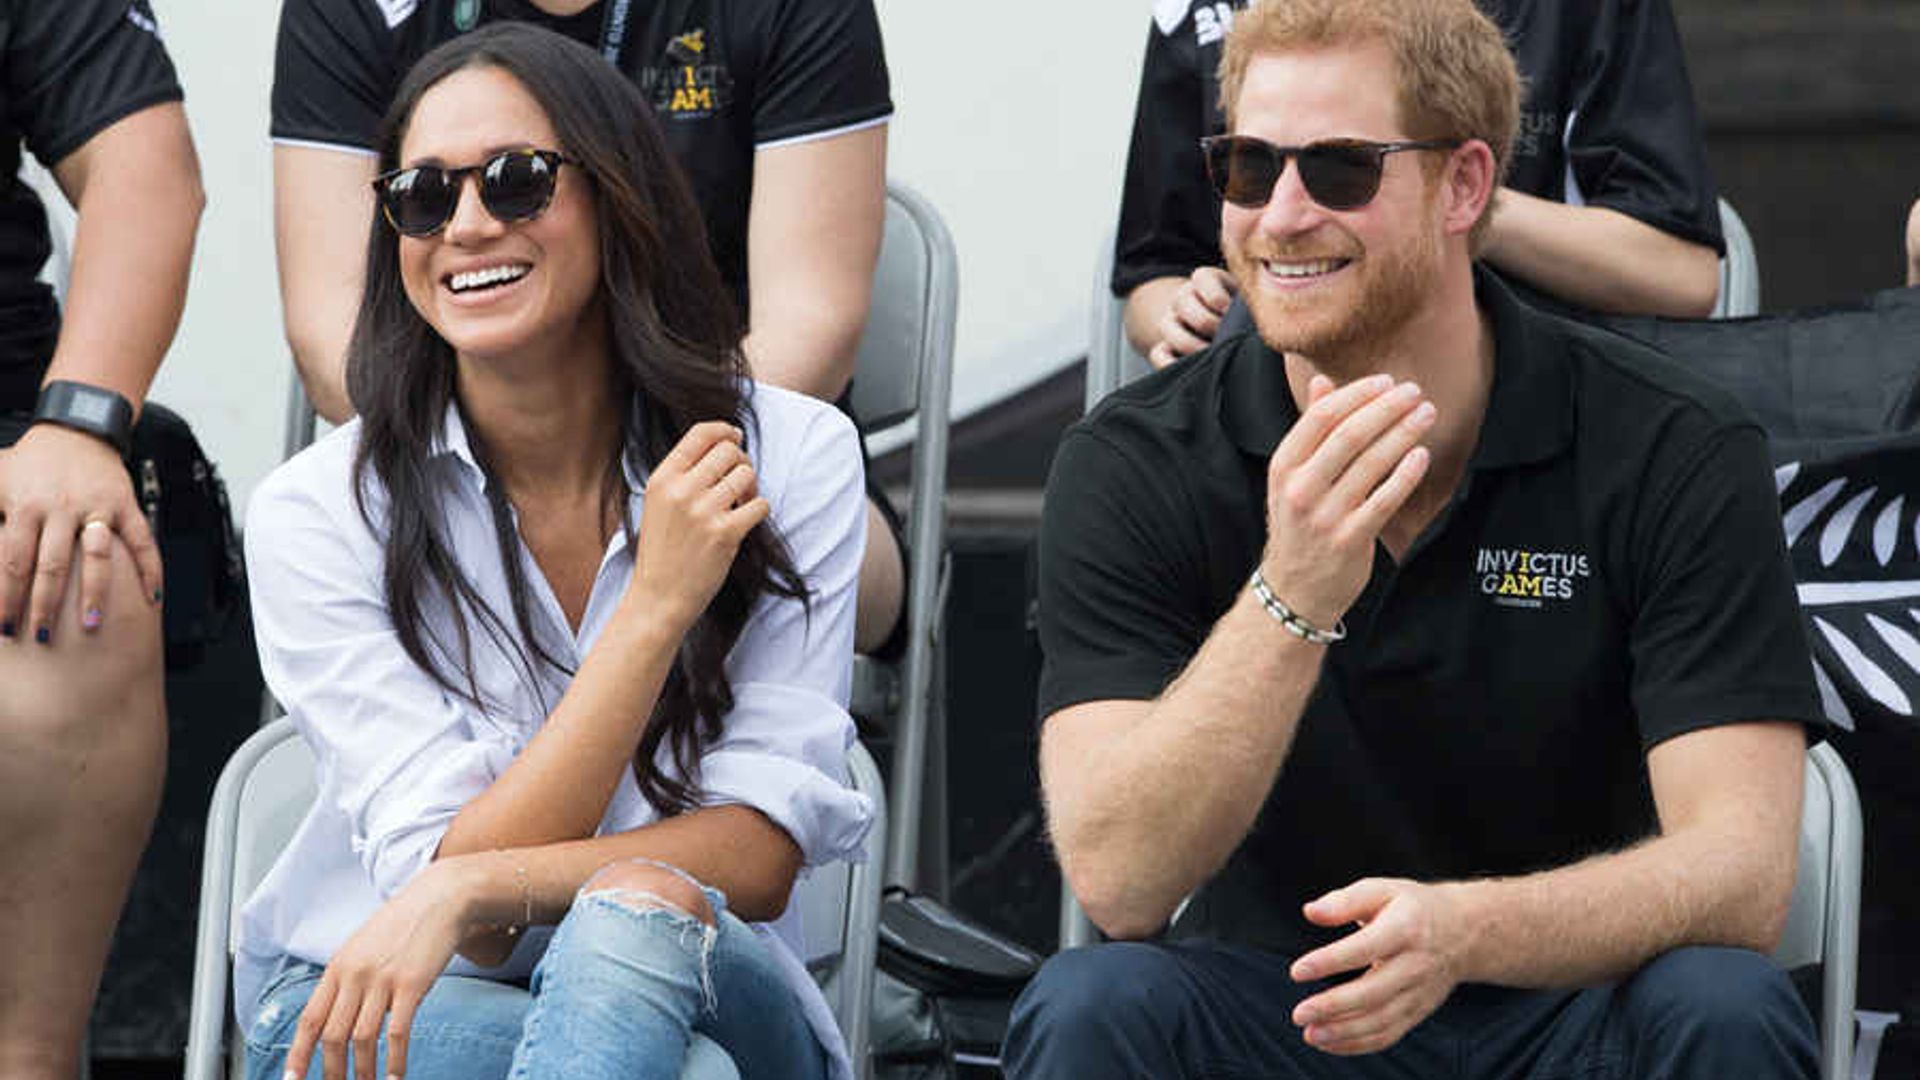 Prince Harry and his girlfriend Meghan Markle are engaged